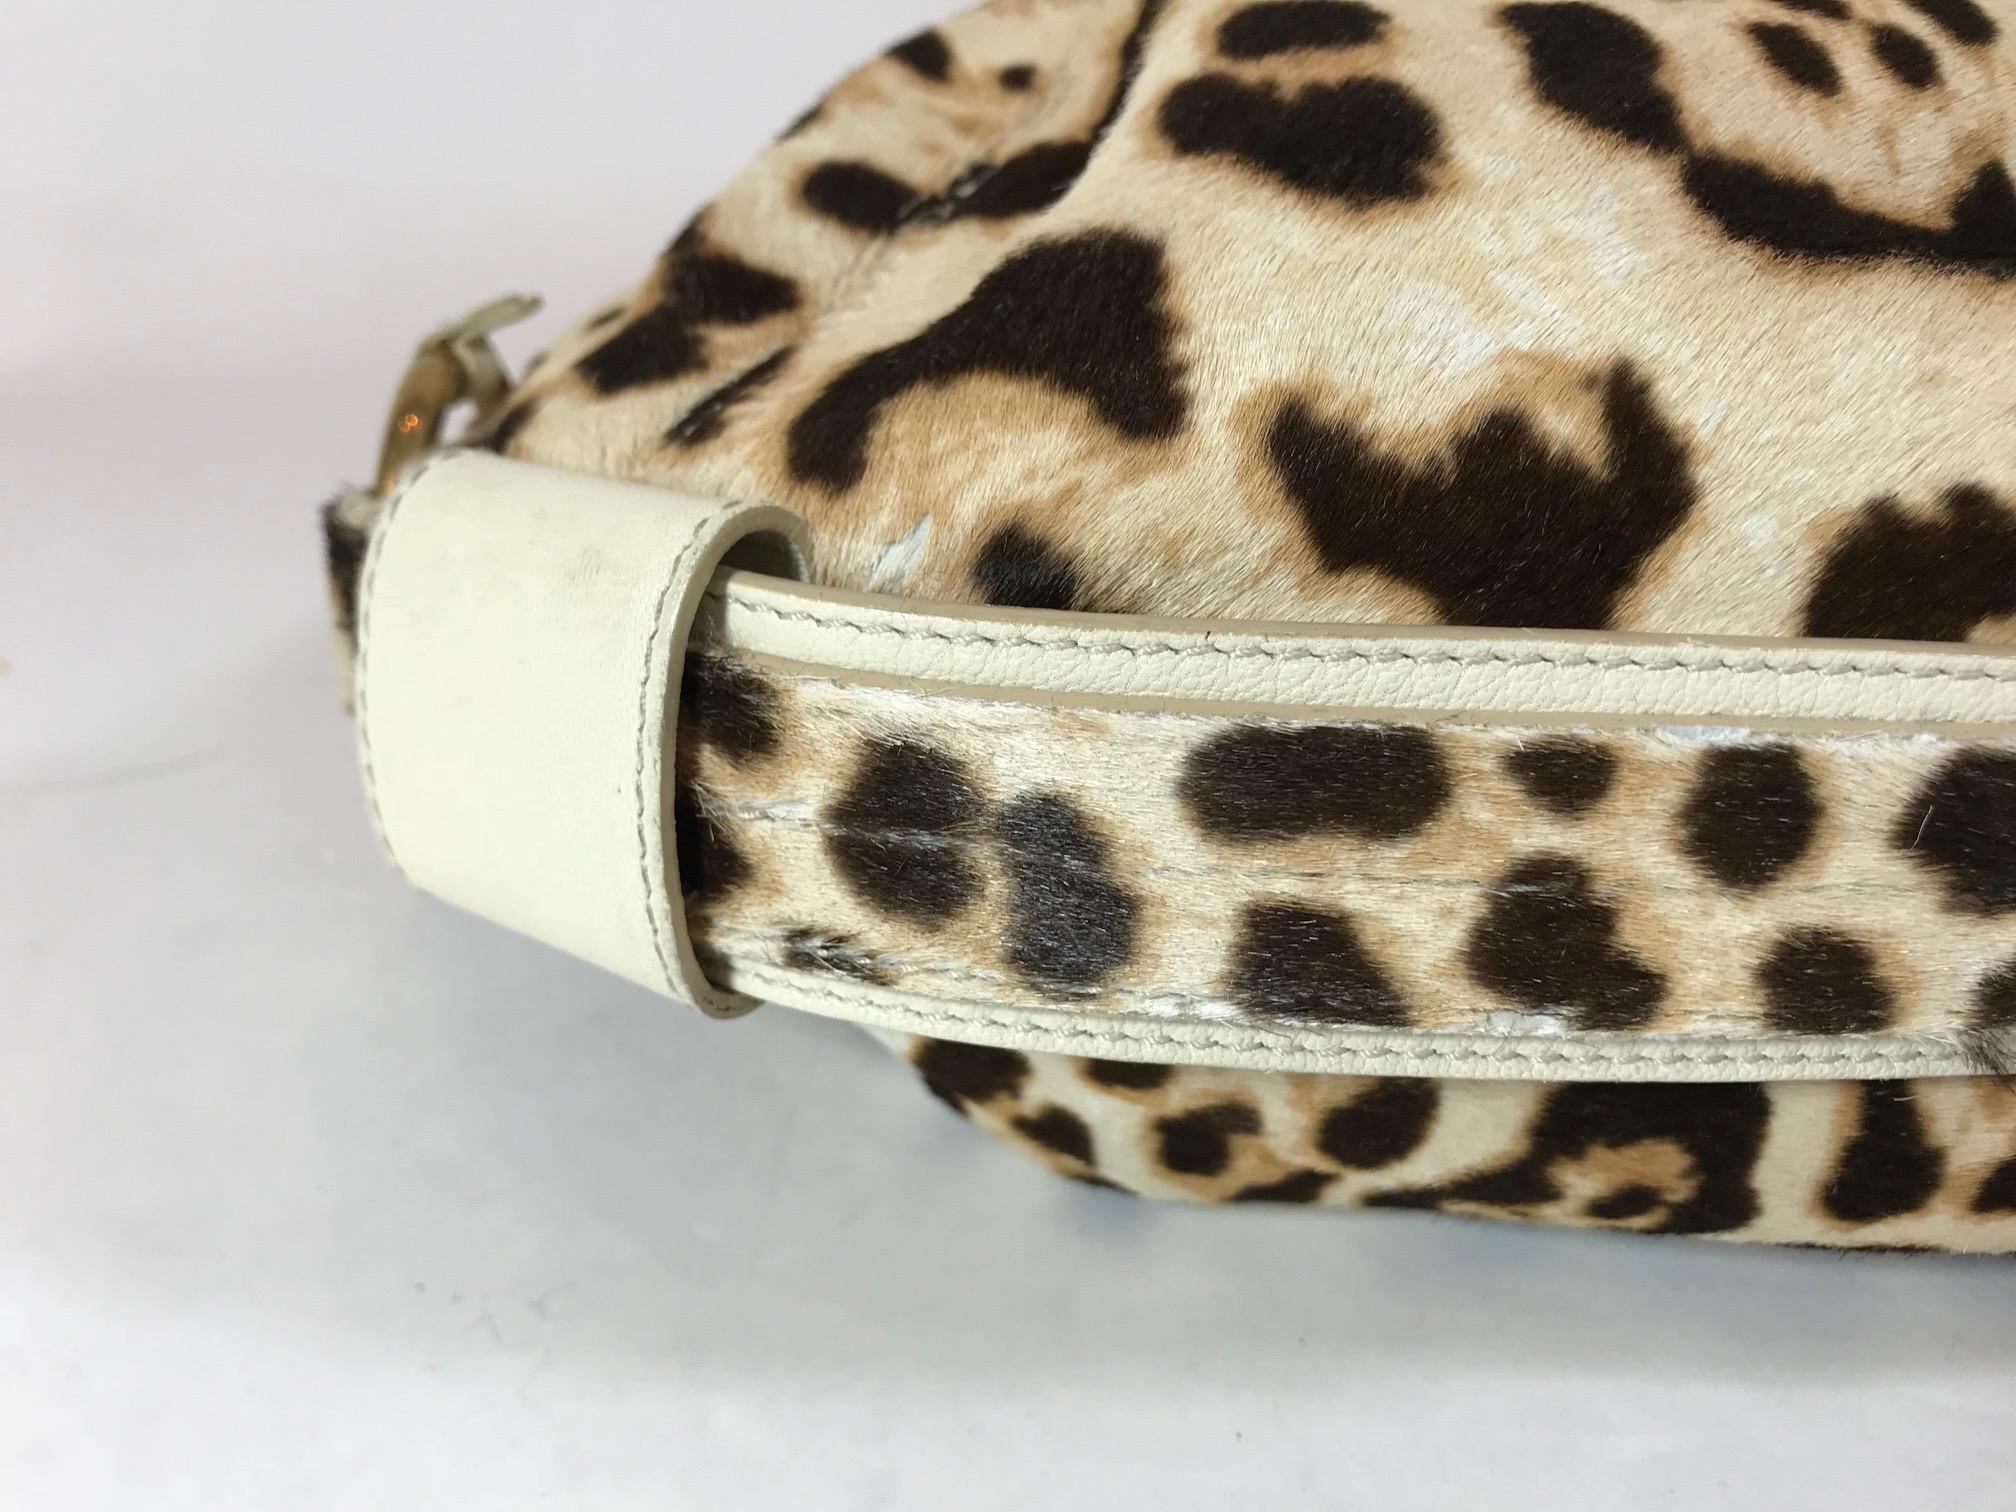 Yves Saint Laurent Leopard Print Calf Hair Hobo In Excellent Condition For Sale In Roslyn, NY